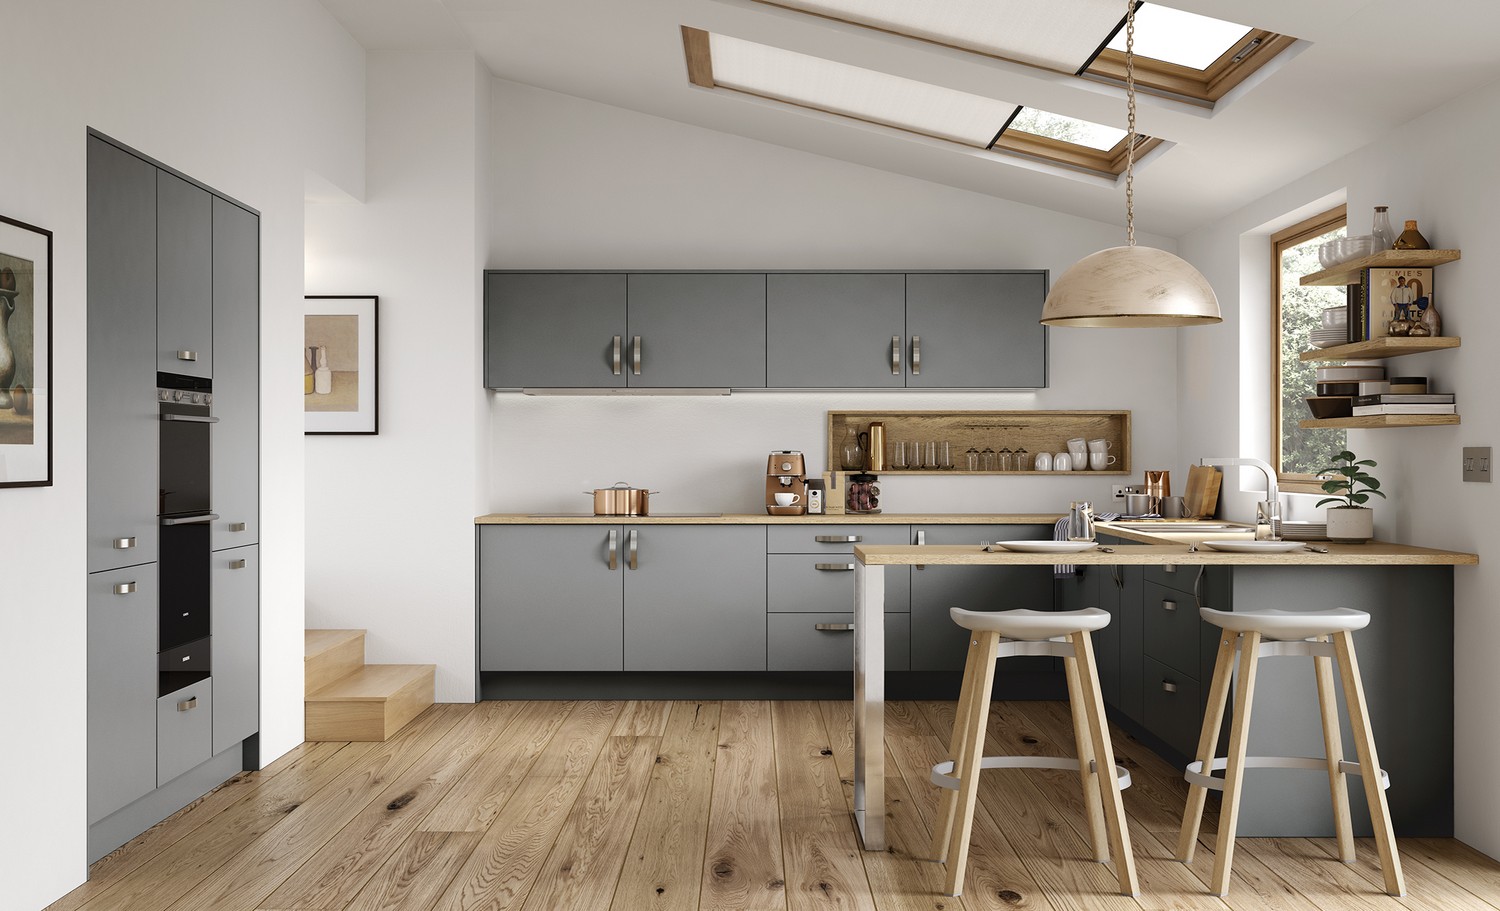 A simple grey slab door with a unique double height oven and large stainless-steel handles have been used here to create a quirky kitchen for our client’s new rear extension in Kirkby, Liverpool. The kitchen doors have a matt finish combined with a wooden worktop achieve a modern edgy look. The kitchen worktops have been extended past the lower cupboards to give a seating area ideal for serving food and entertaining company while cooking. The ceramic cooking hob has been integrated into the worktop and the extraction fan has been hidden within the cupboard above. 